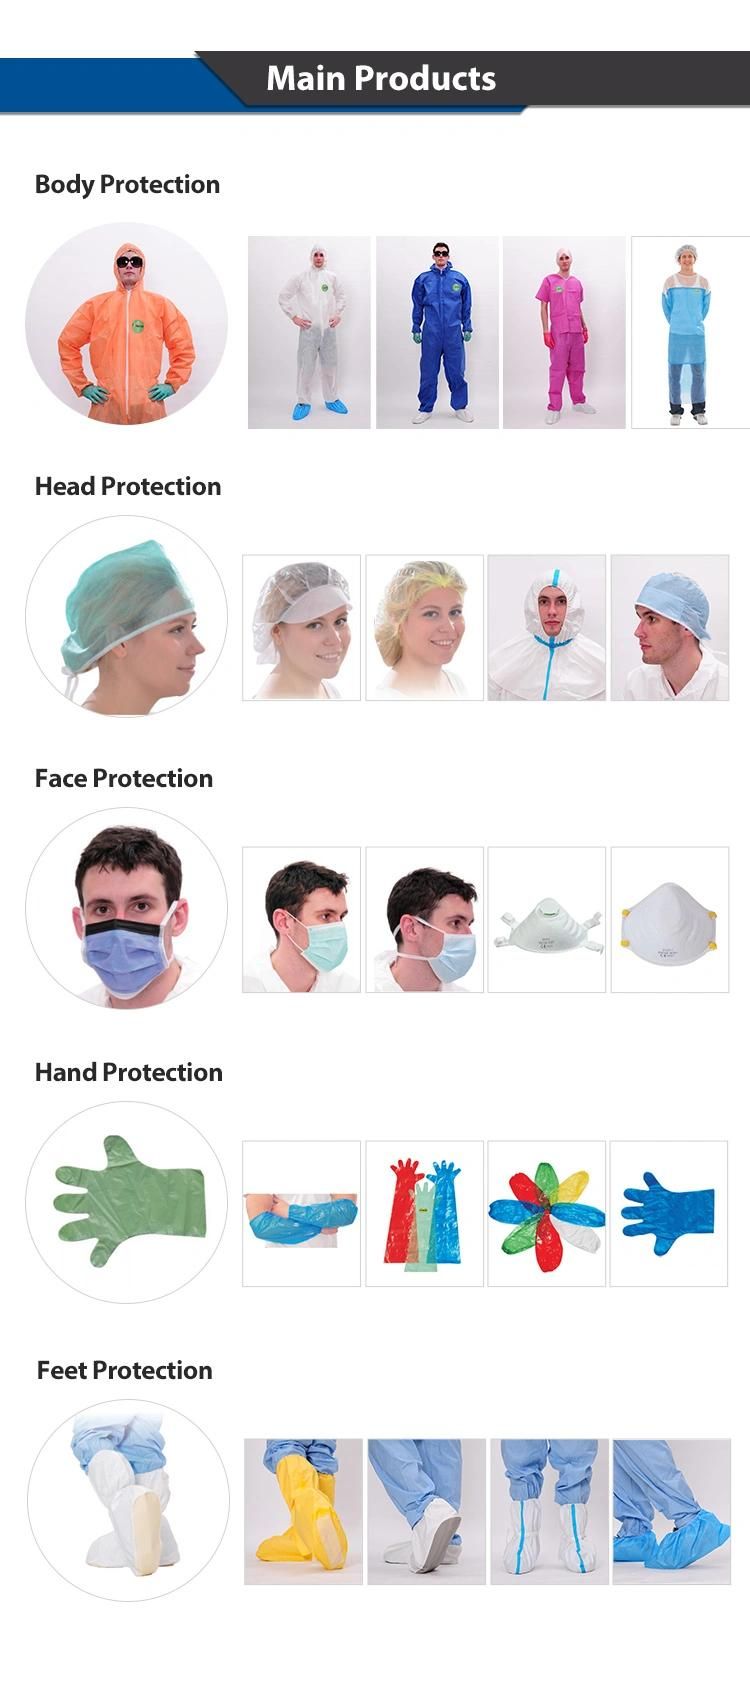 Green Nonwoven/SMS/PP/Crimped/Pleated/Strip/Surgeon Disposable Doctor Operation Cap